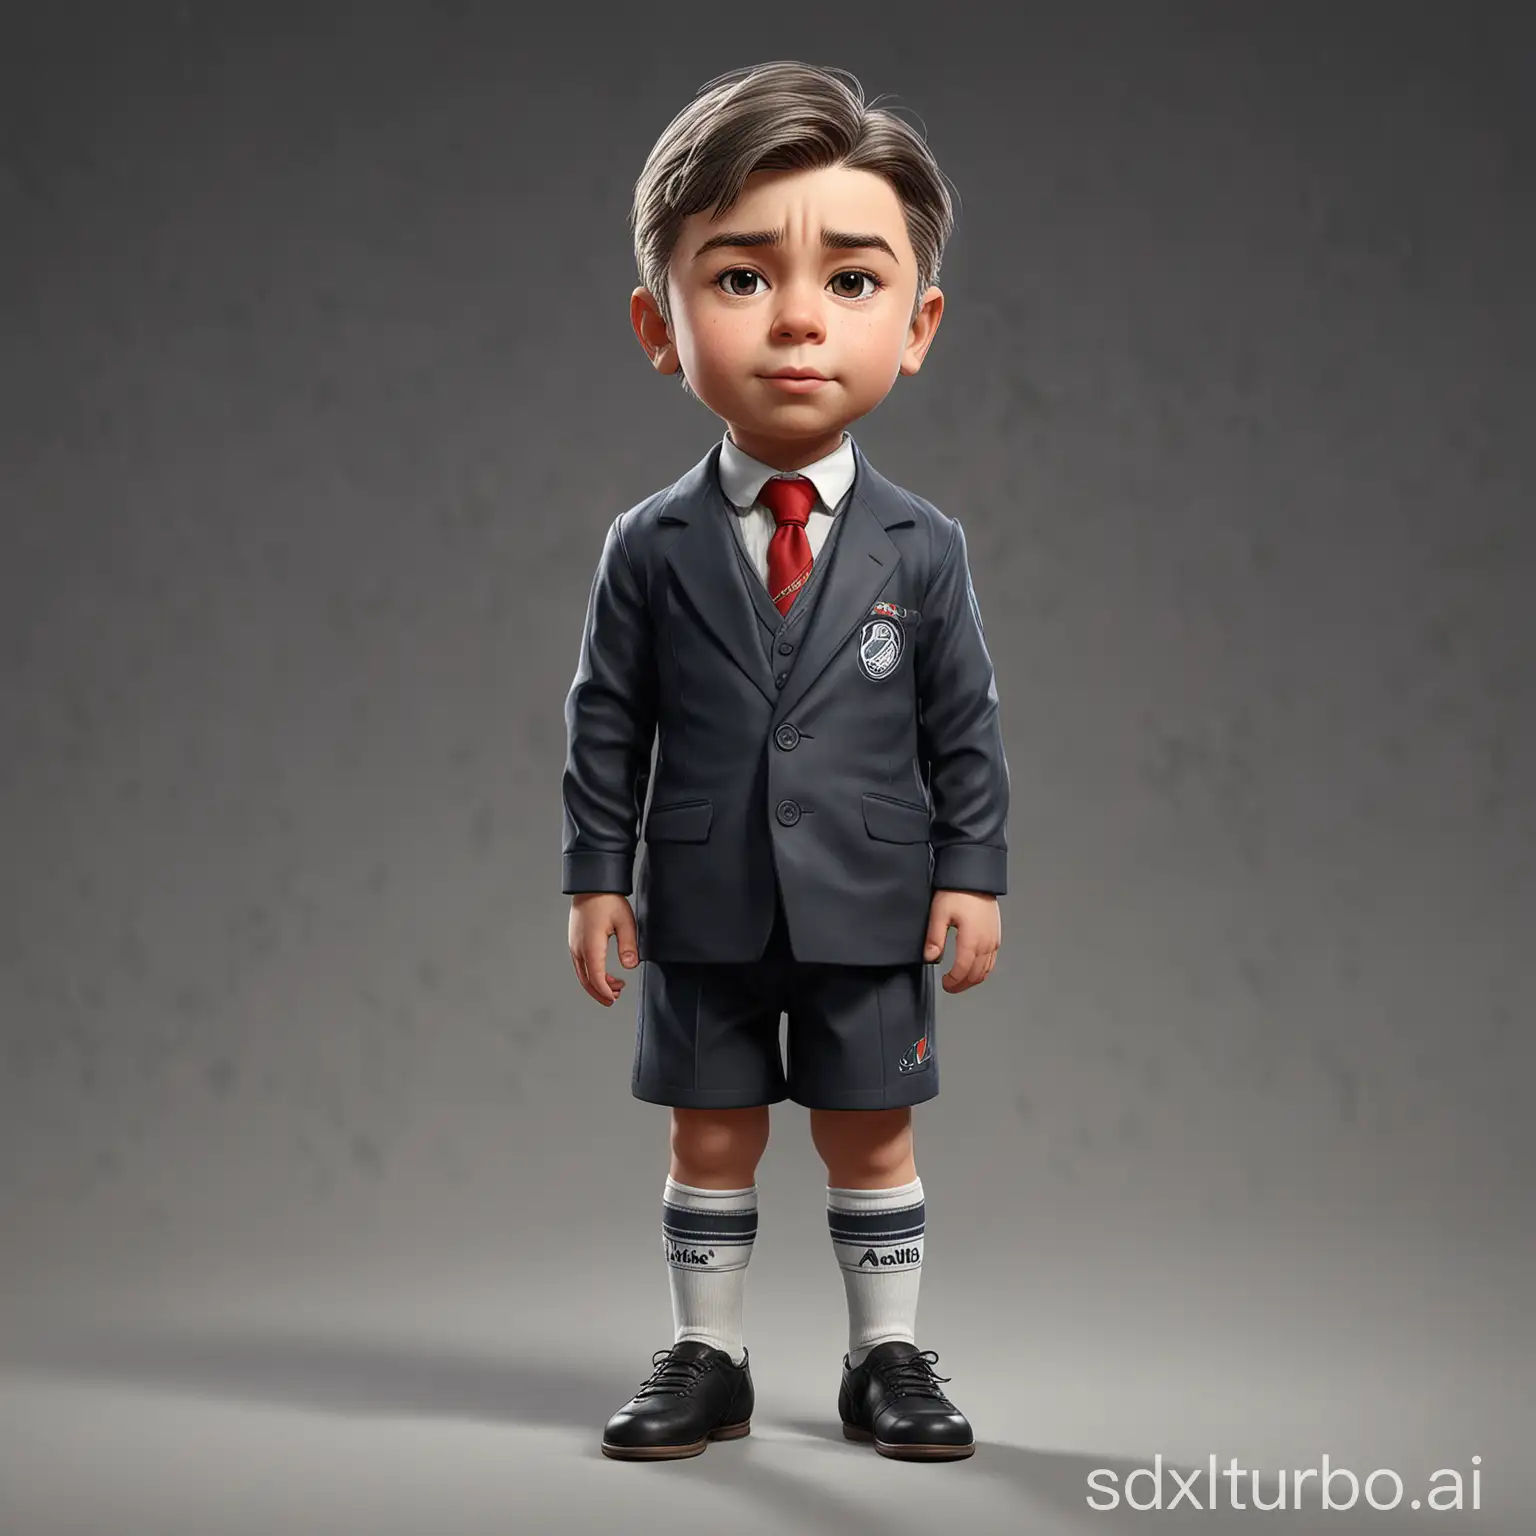 Little child Carlo Ancelotti, game character, stands at full height